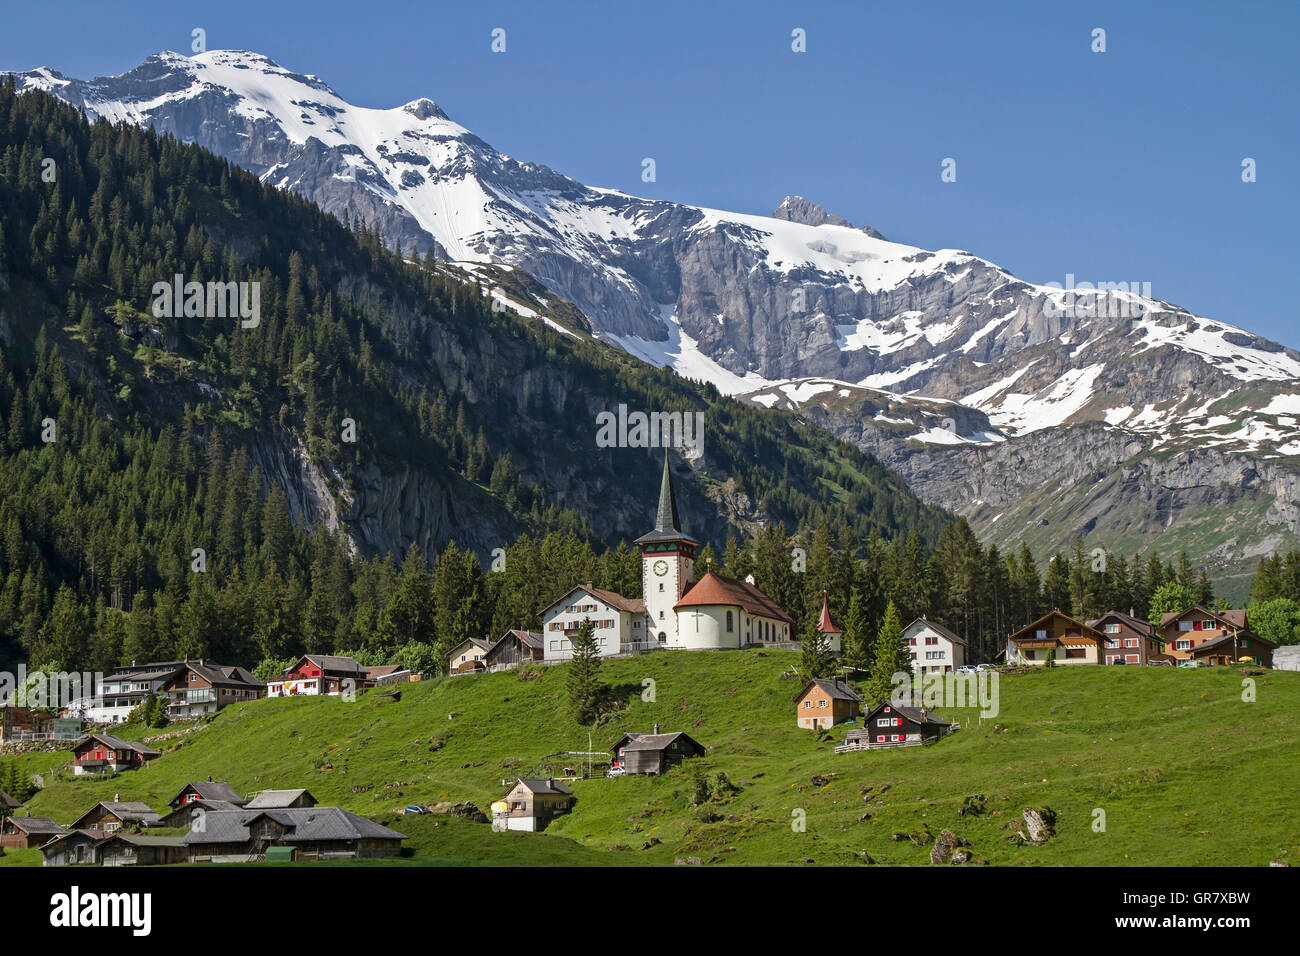 The Urnerboden Is The Largest Alp In Switzerland And Is Inhabited The Whole Year Over Stock Photo